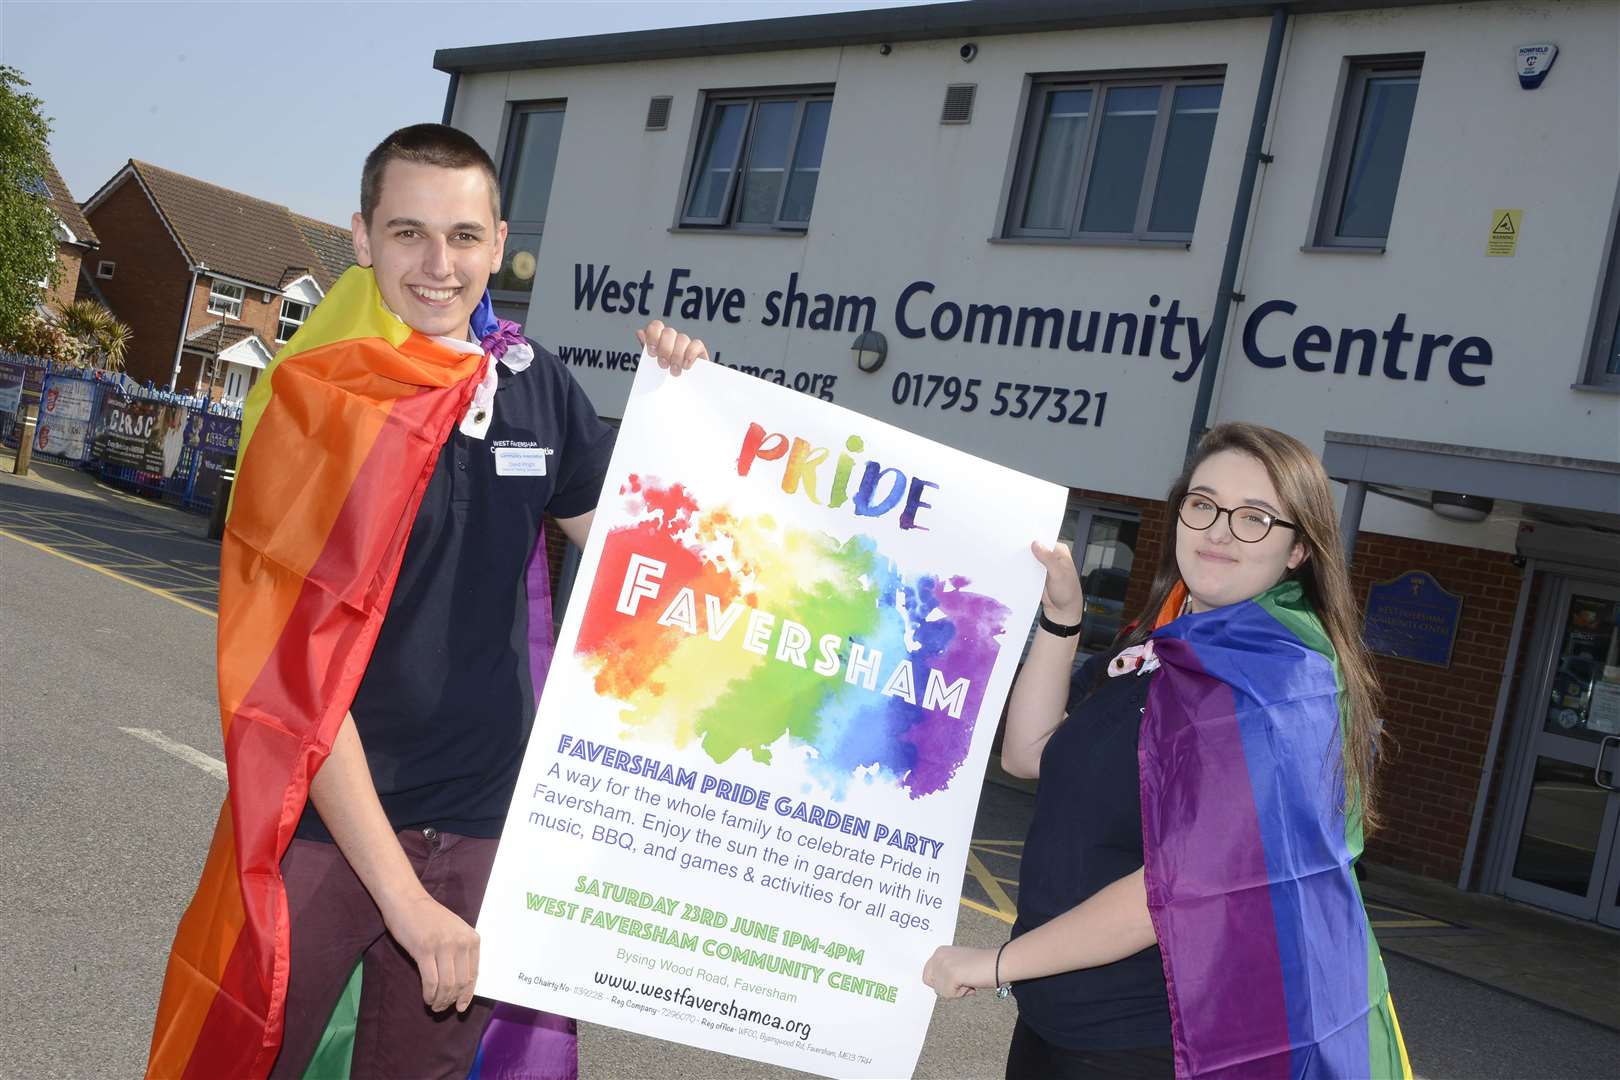 David Wright and Hannah Wood promoting the Summer Pride Event